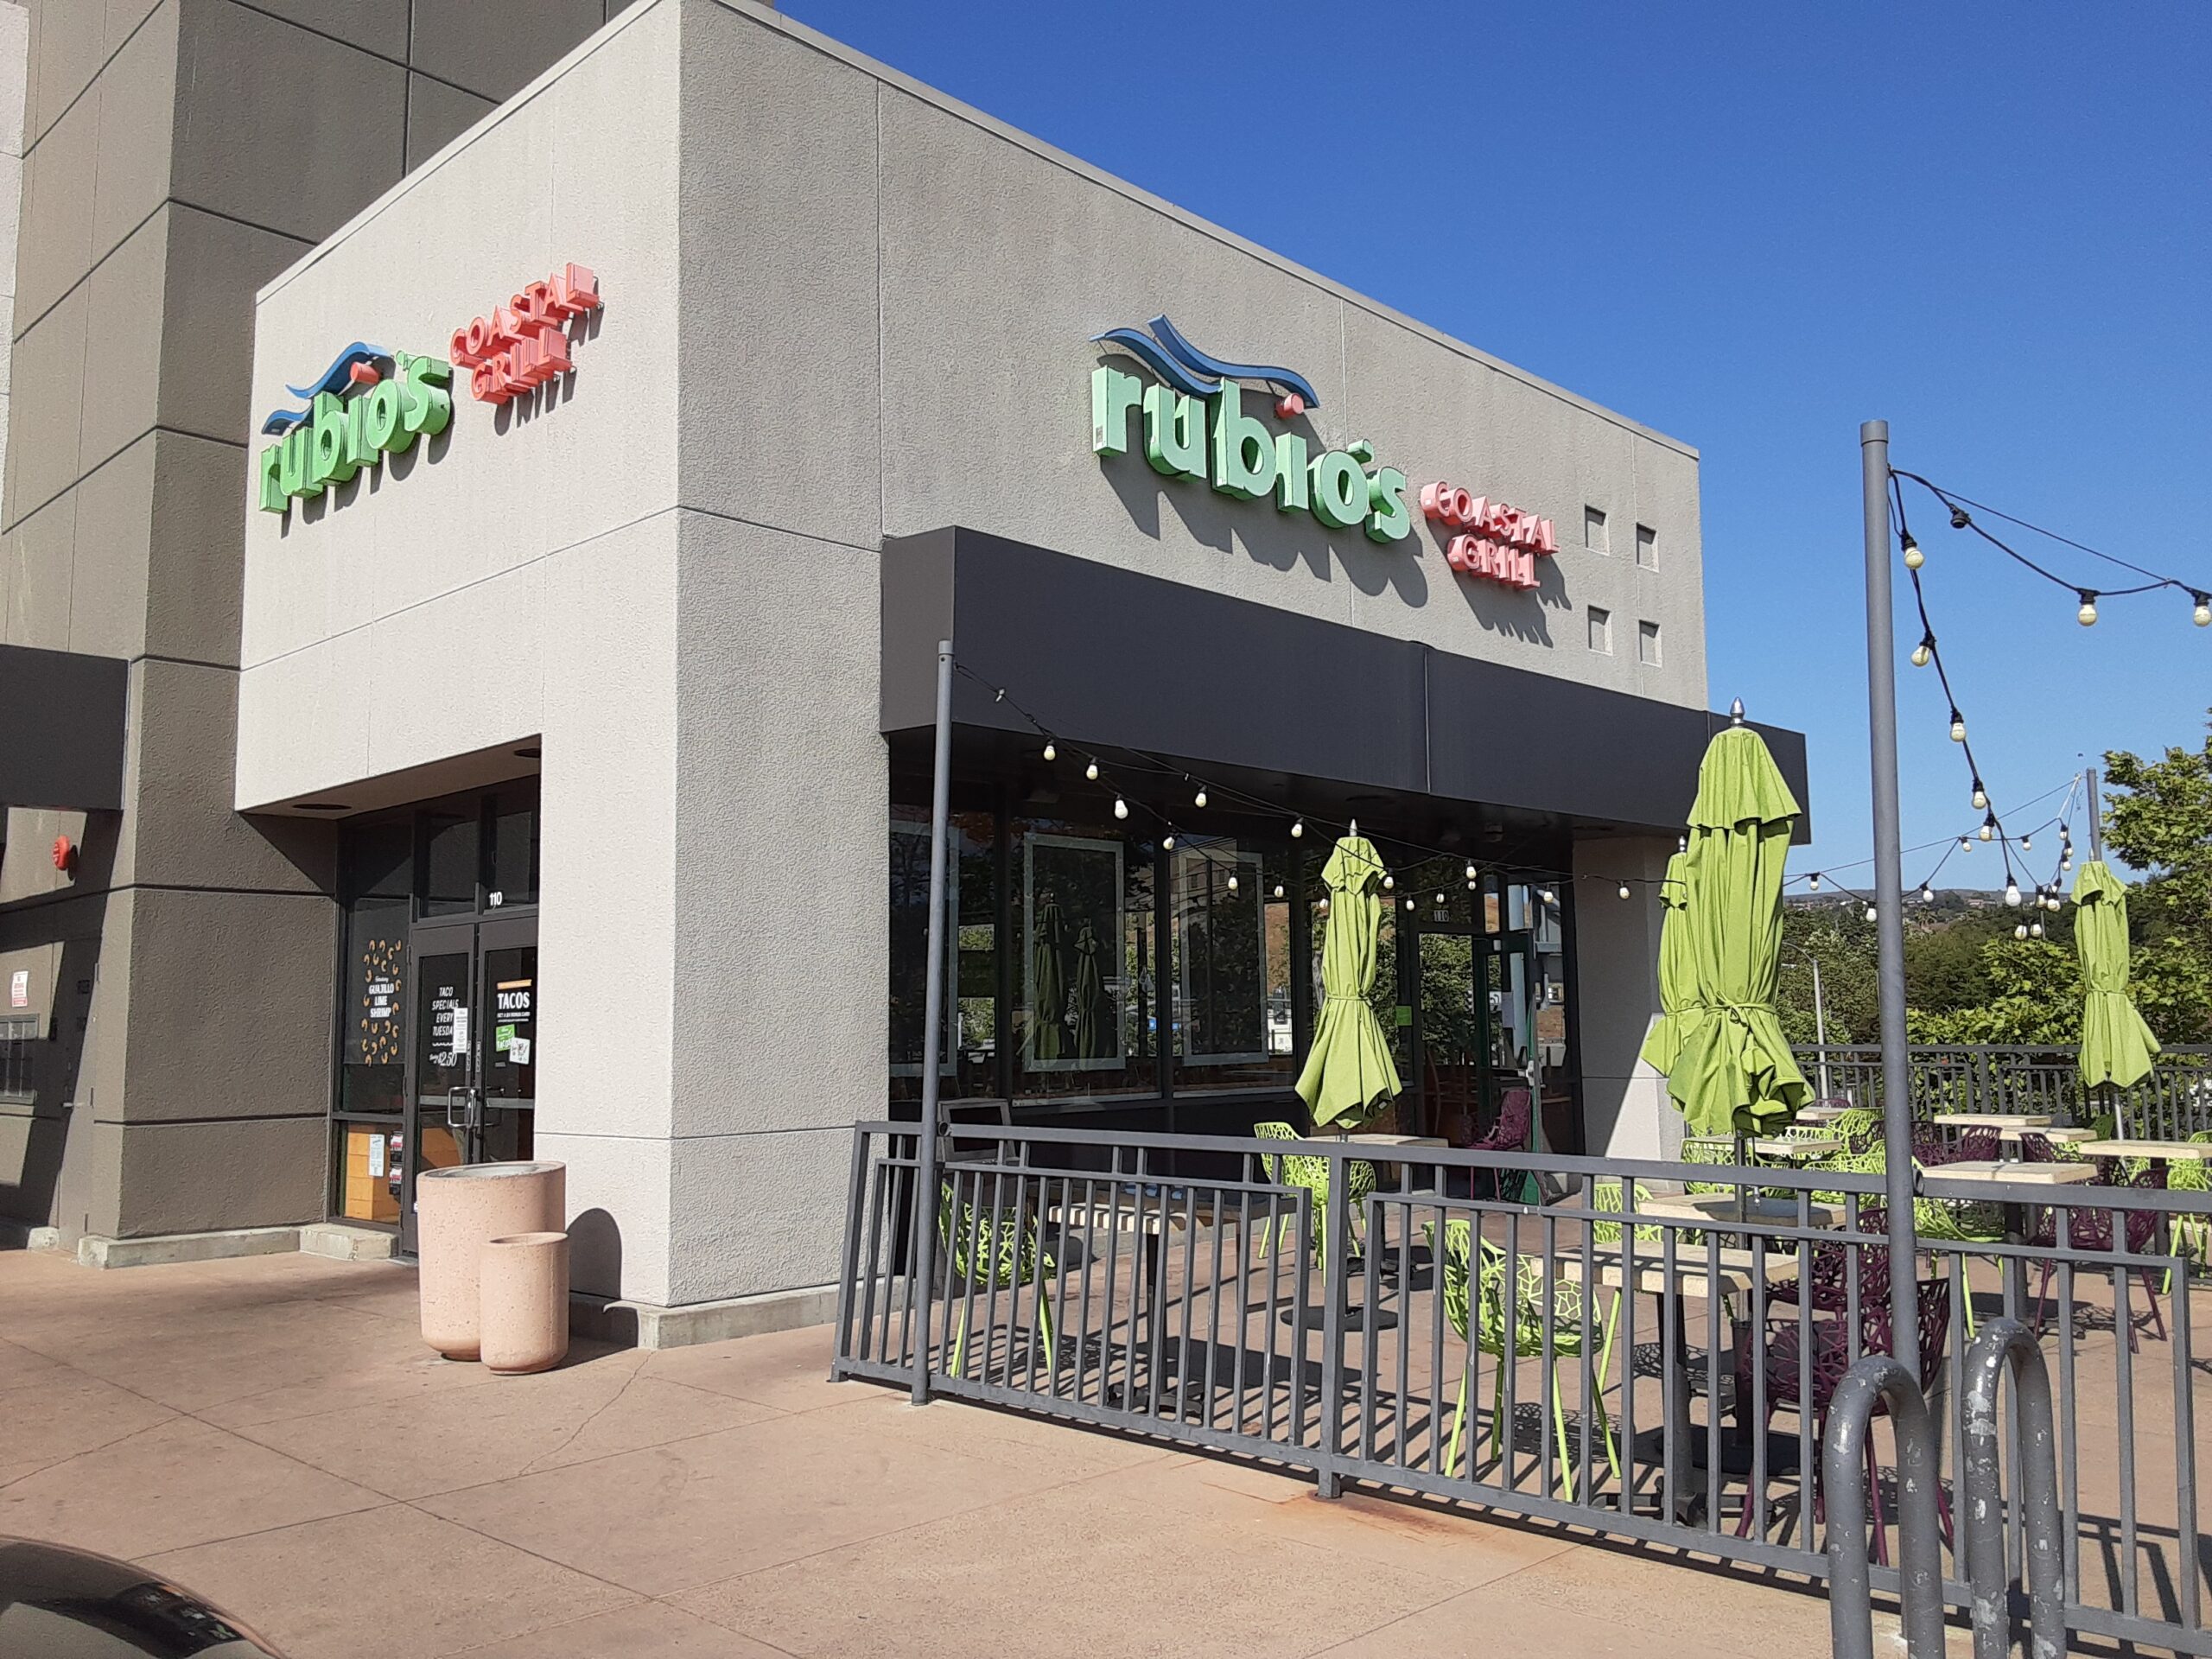 Rubio’s Coastal Grill files for Chapter 11 after closing 48 stores